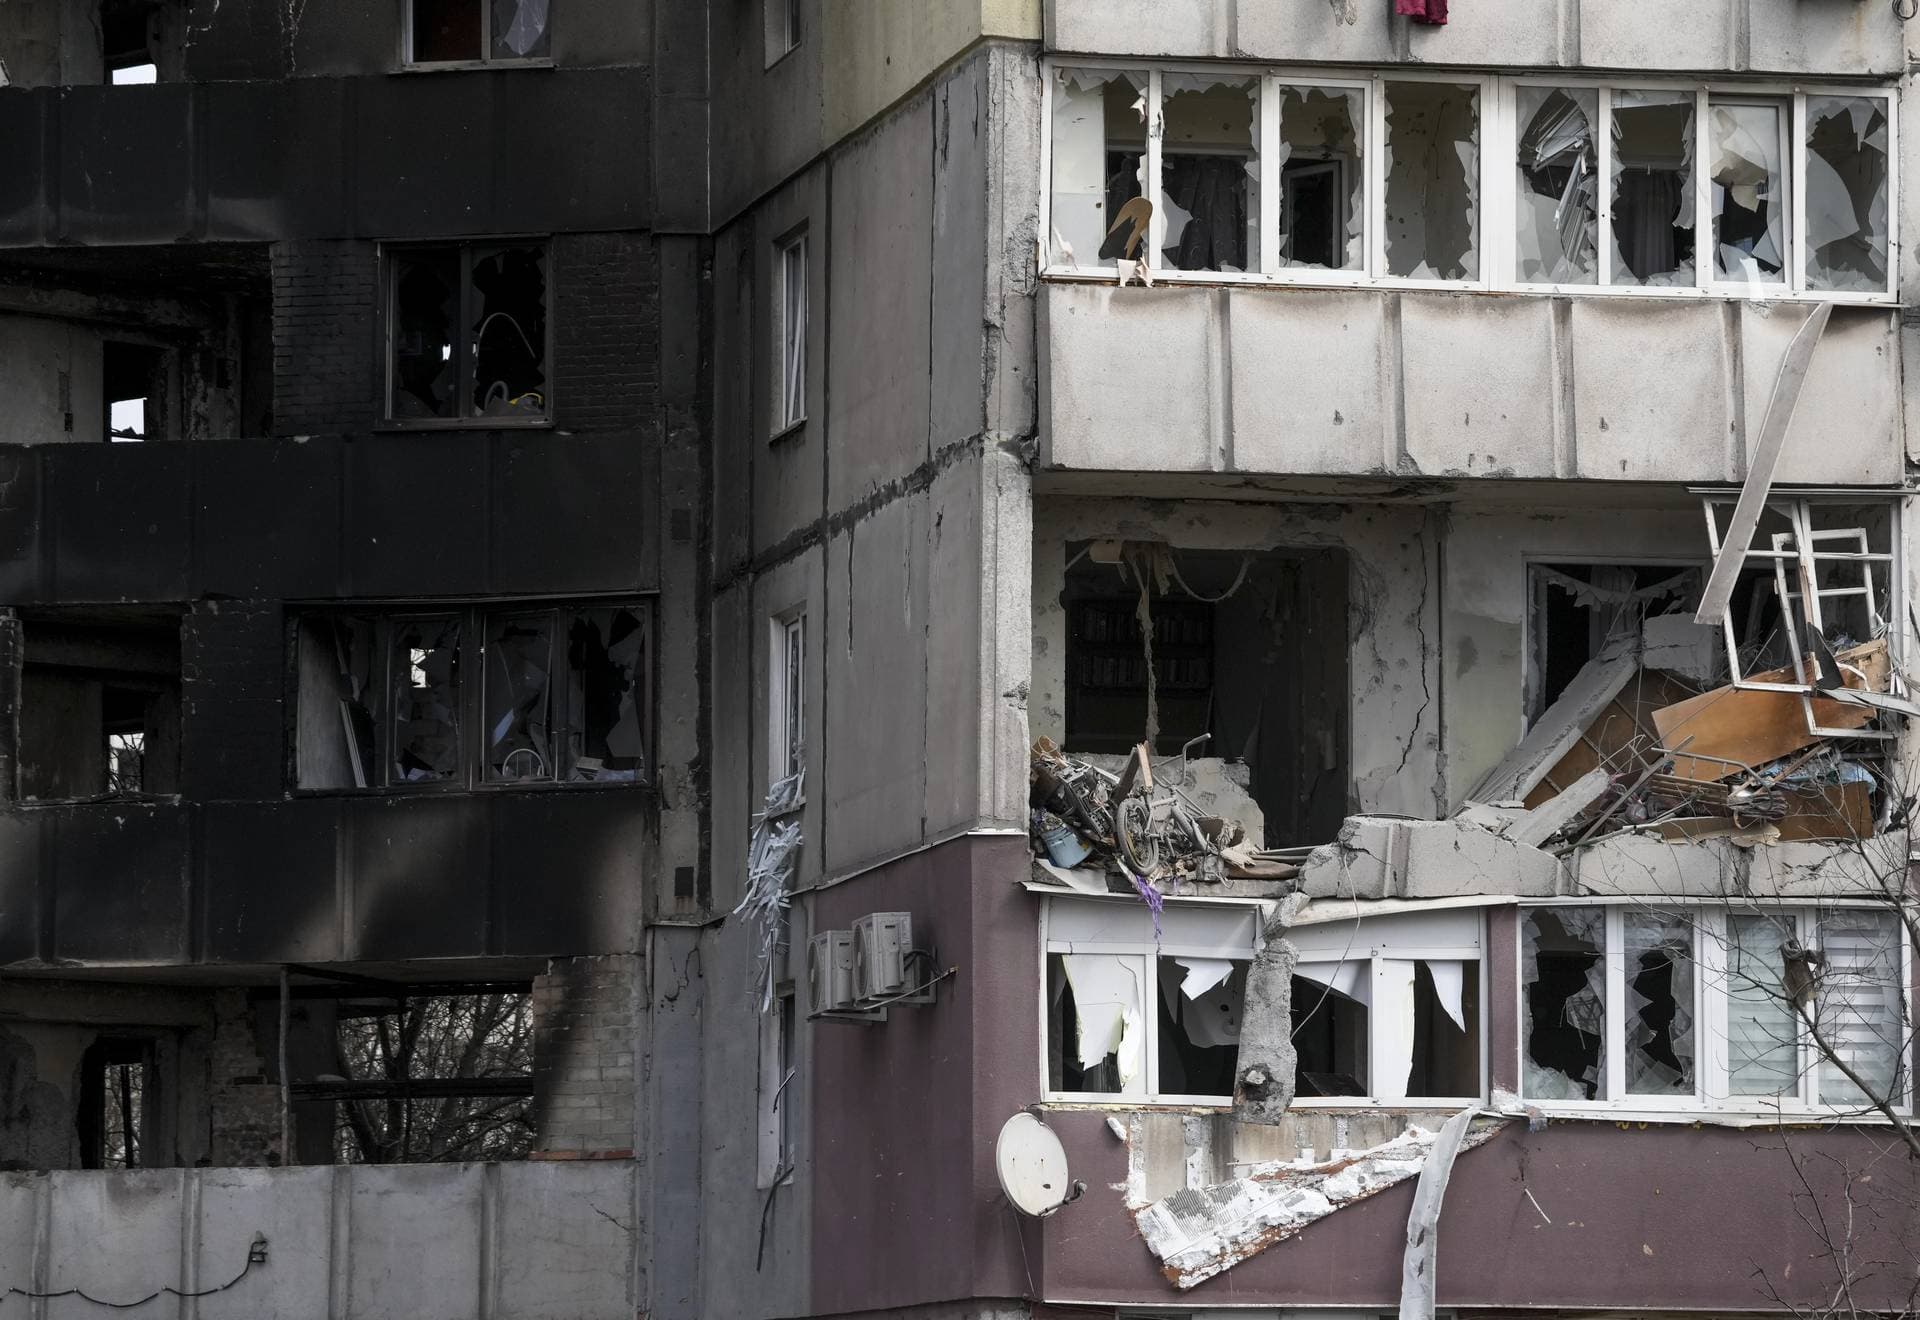 More than 10,000 civilians died in Mariupol